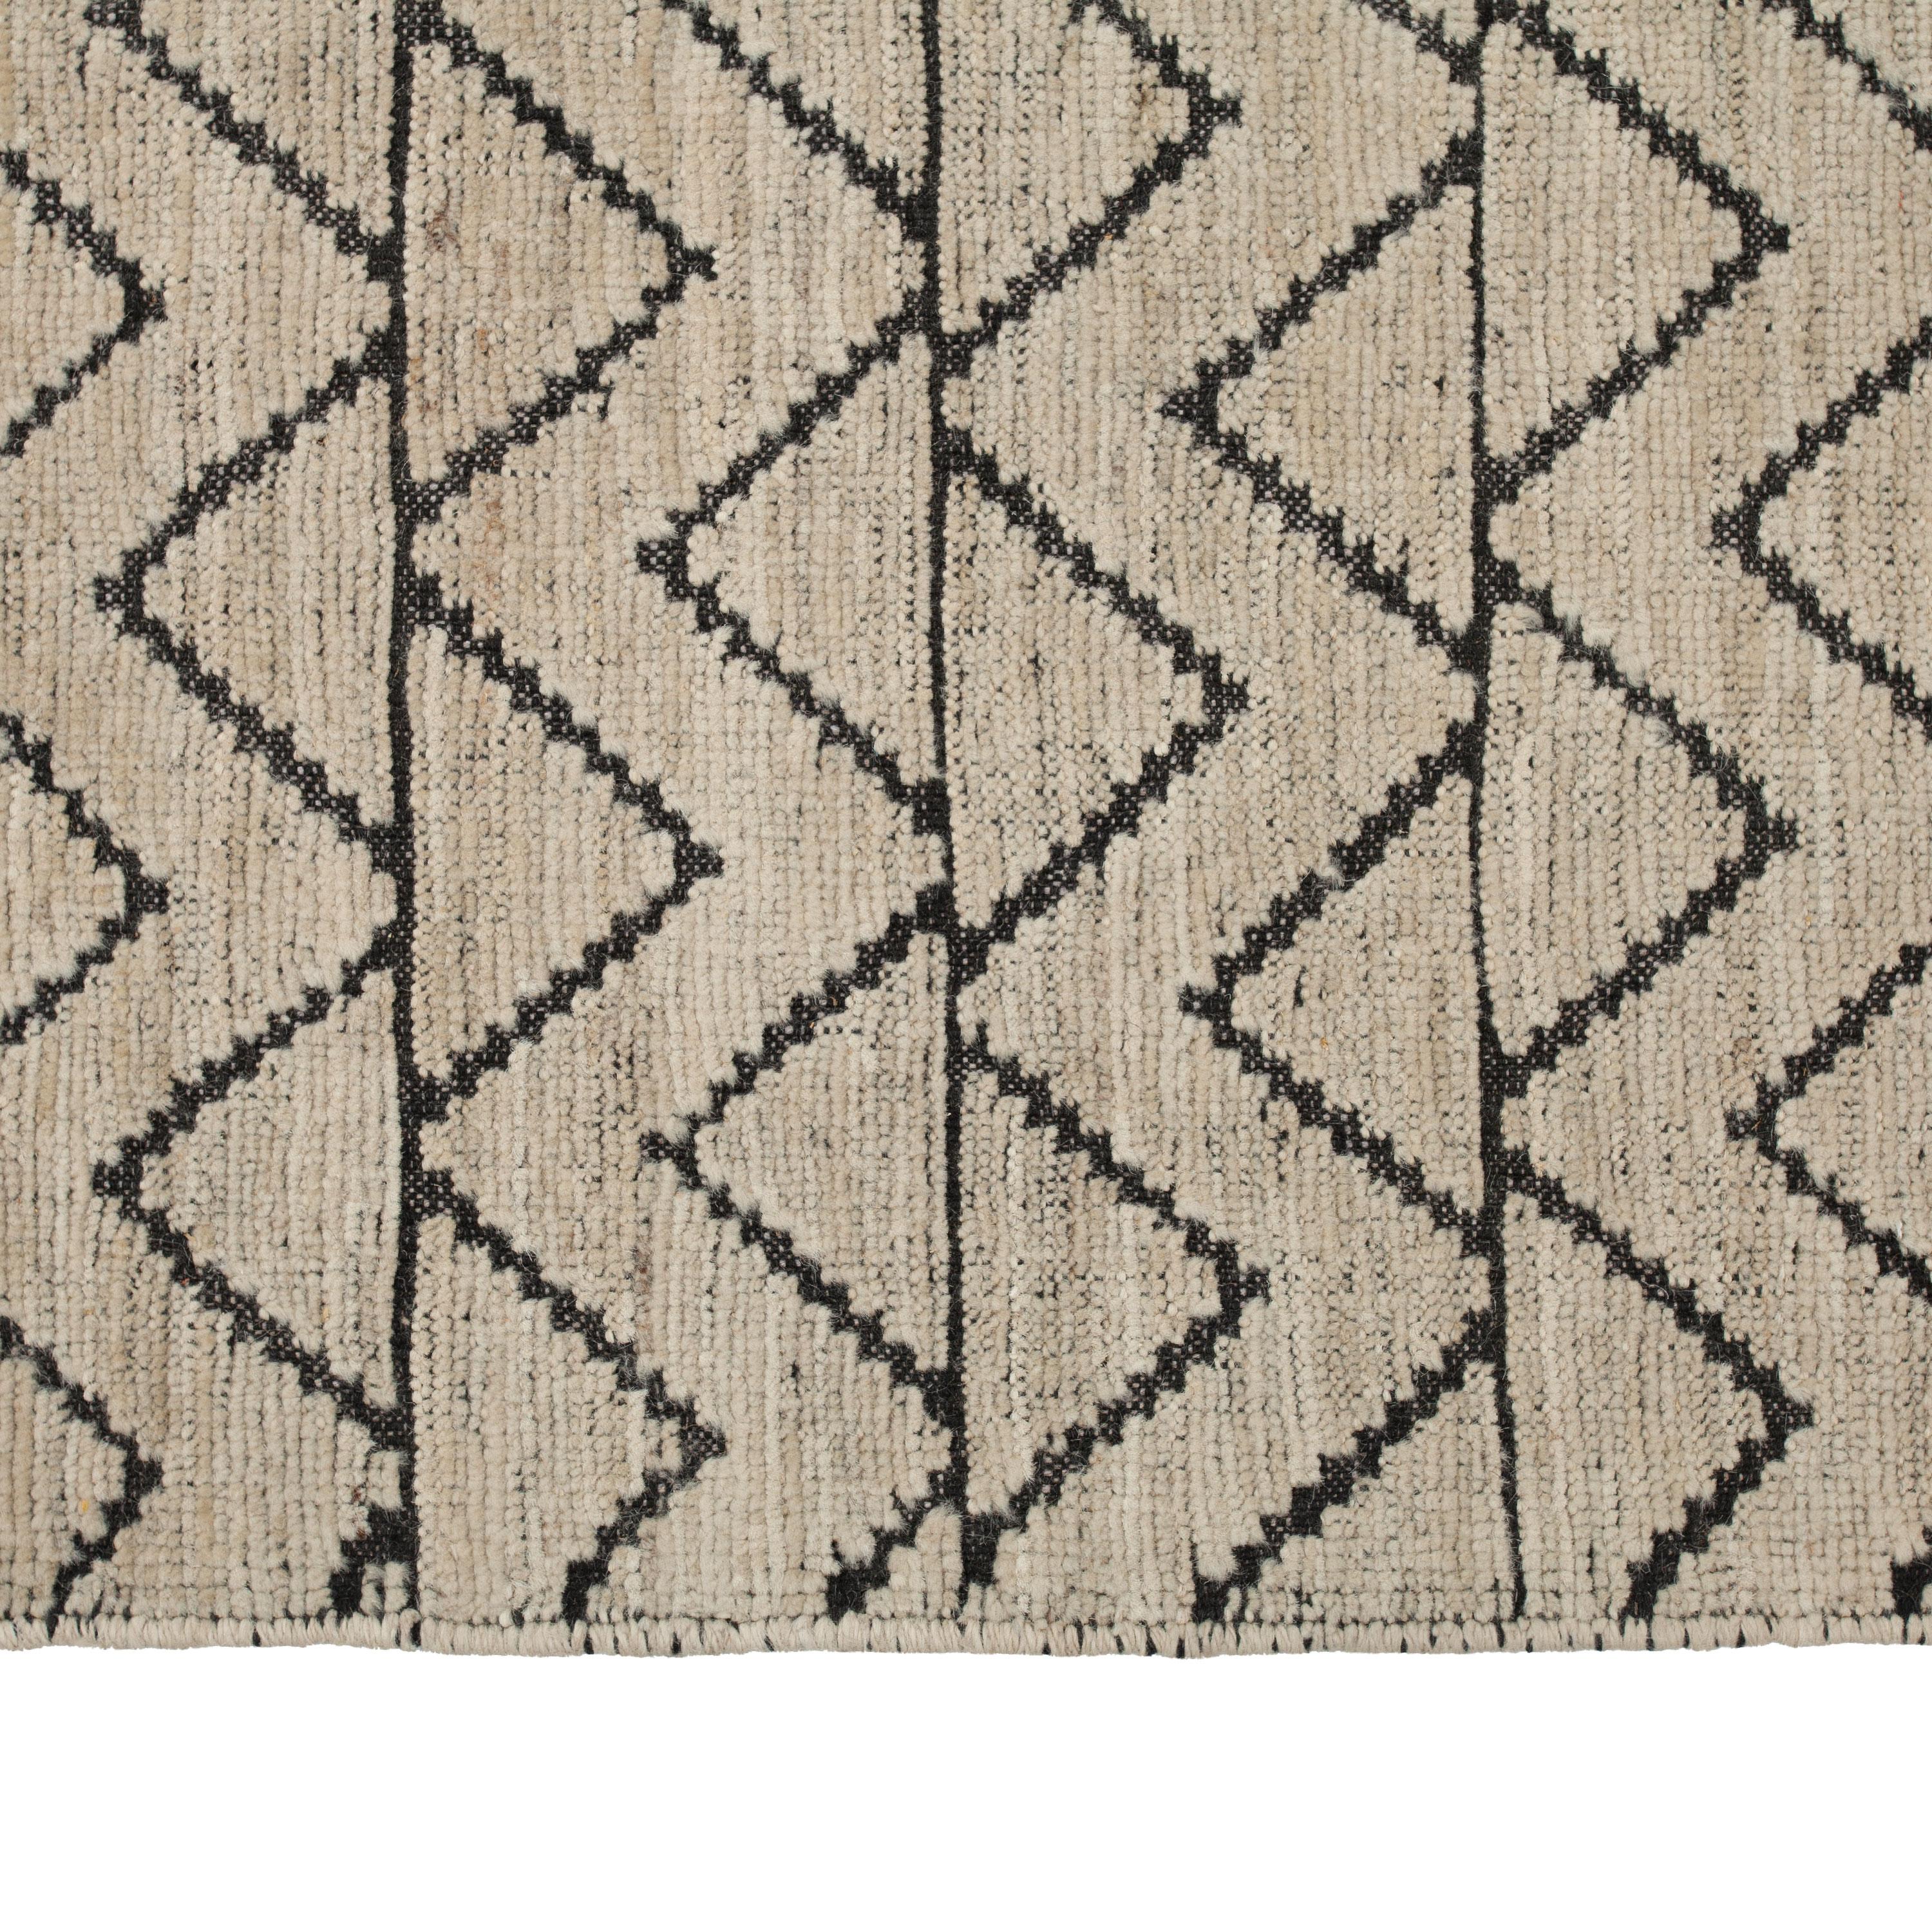 Hand-Knotted abc carpet Zameen Cream and Black Geometric Wool Rug - 8'4